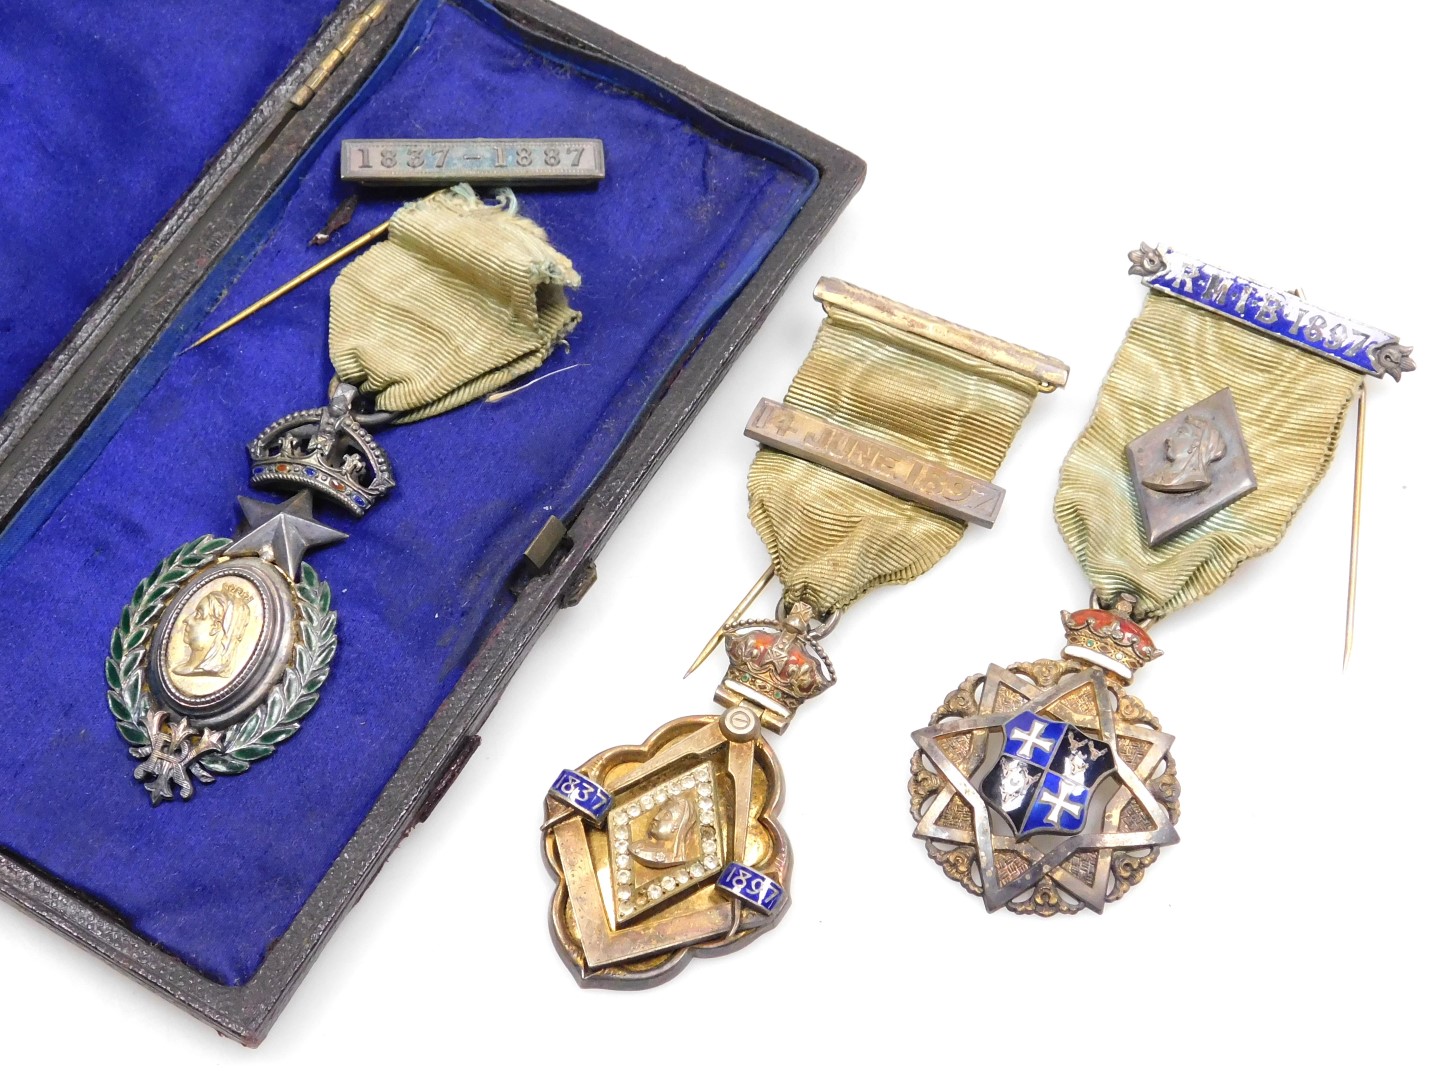 Two Victorian Masonic jewels, to commemorate the golden and diamond jubilees of Her Majesty Queen Vi